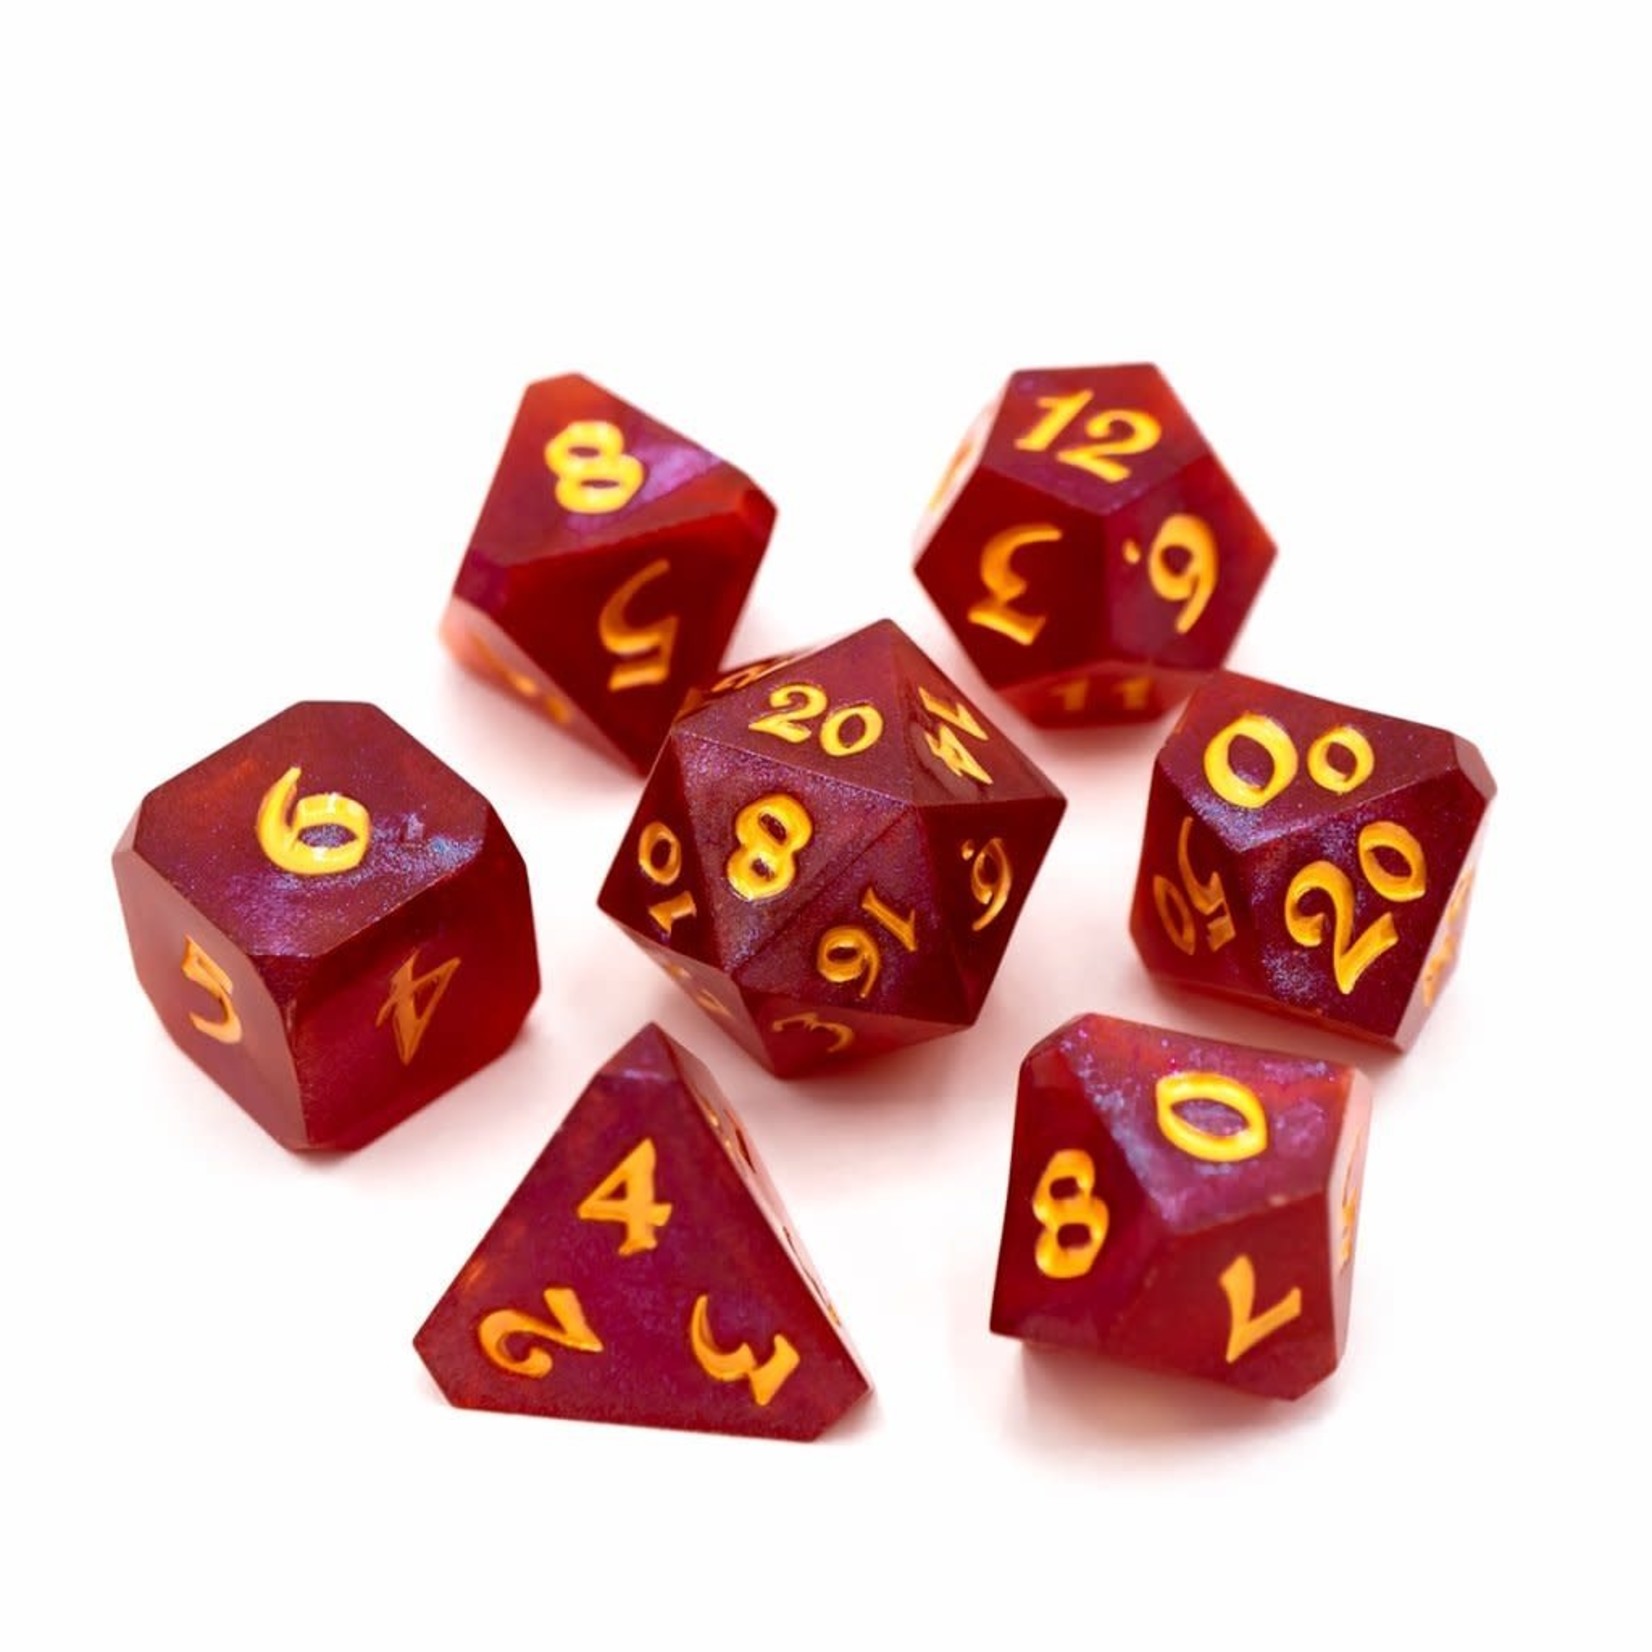 Die Hard Dice 7 Piece RPG Set - Avalore Enchanted Little Red